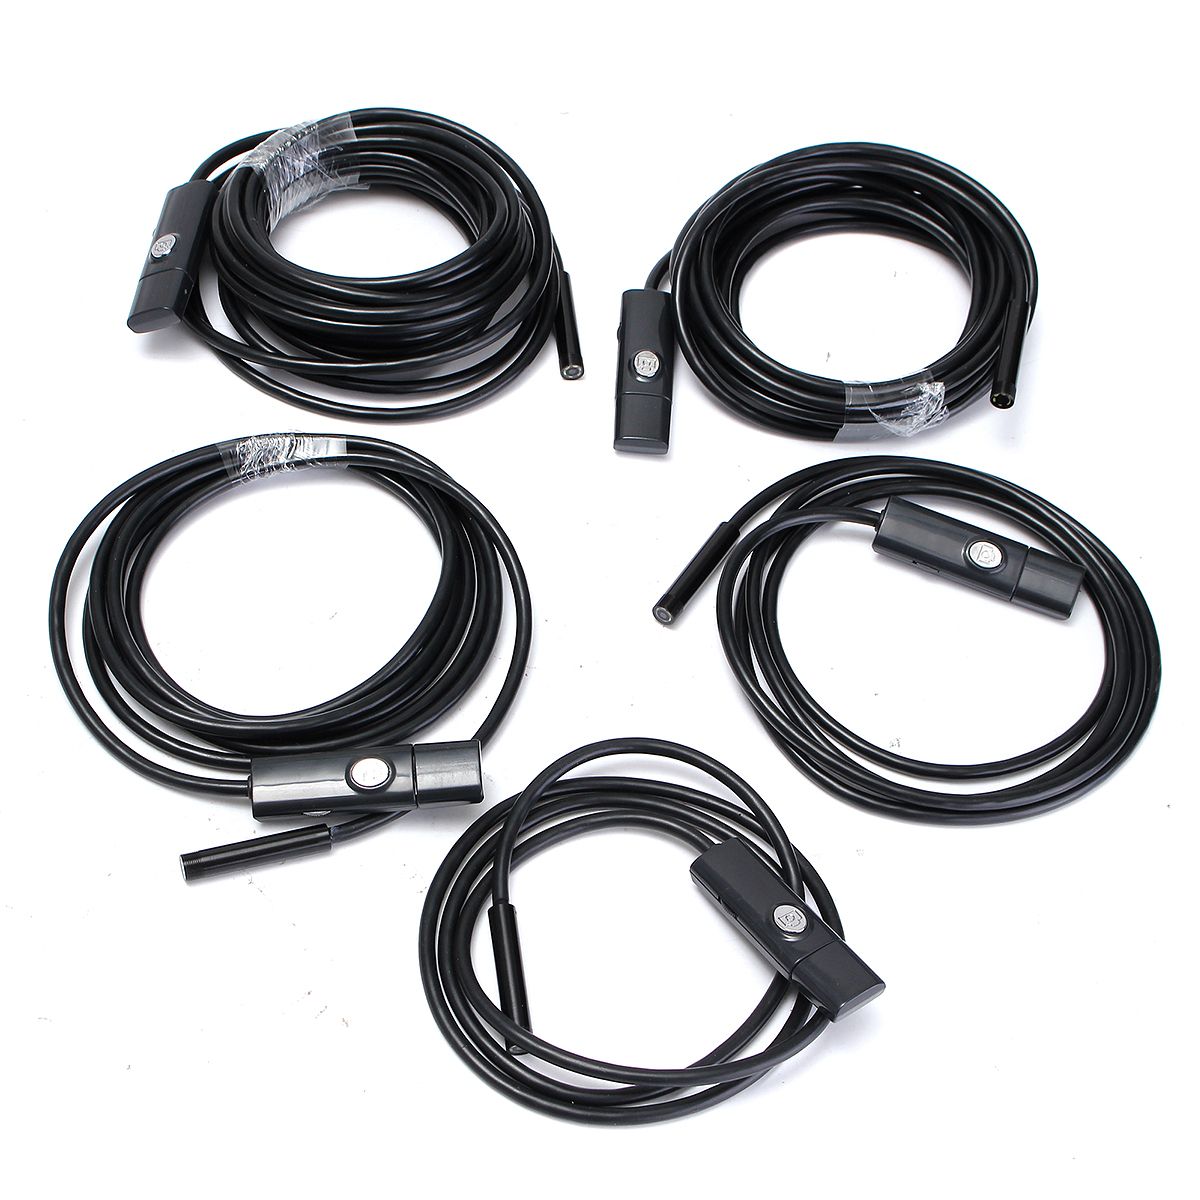 Waterproof-IP67-6-LED-55mm-Lens-USB-Wire-Borescope-Camera-Inspection-Borescope-Tube-Camera-for-Andro-1068395